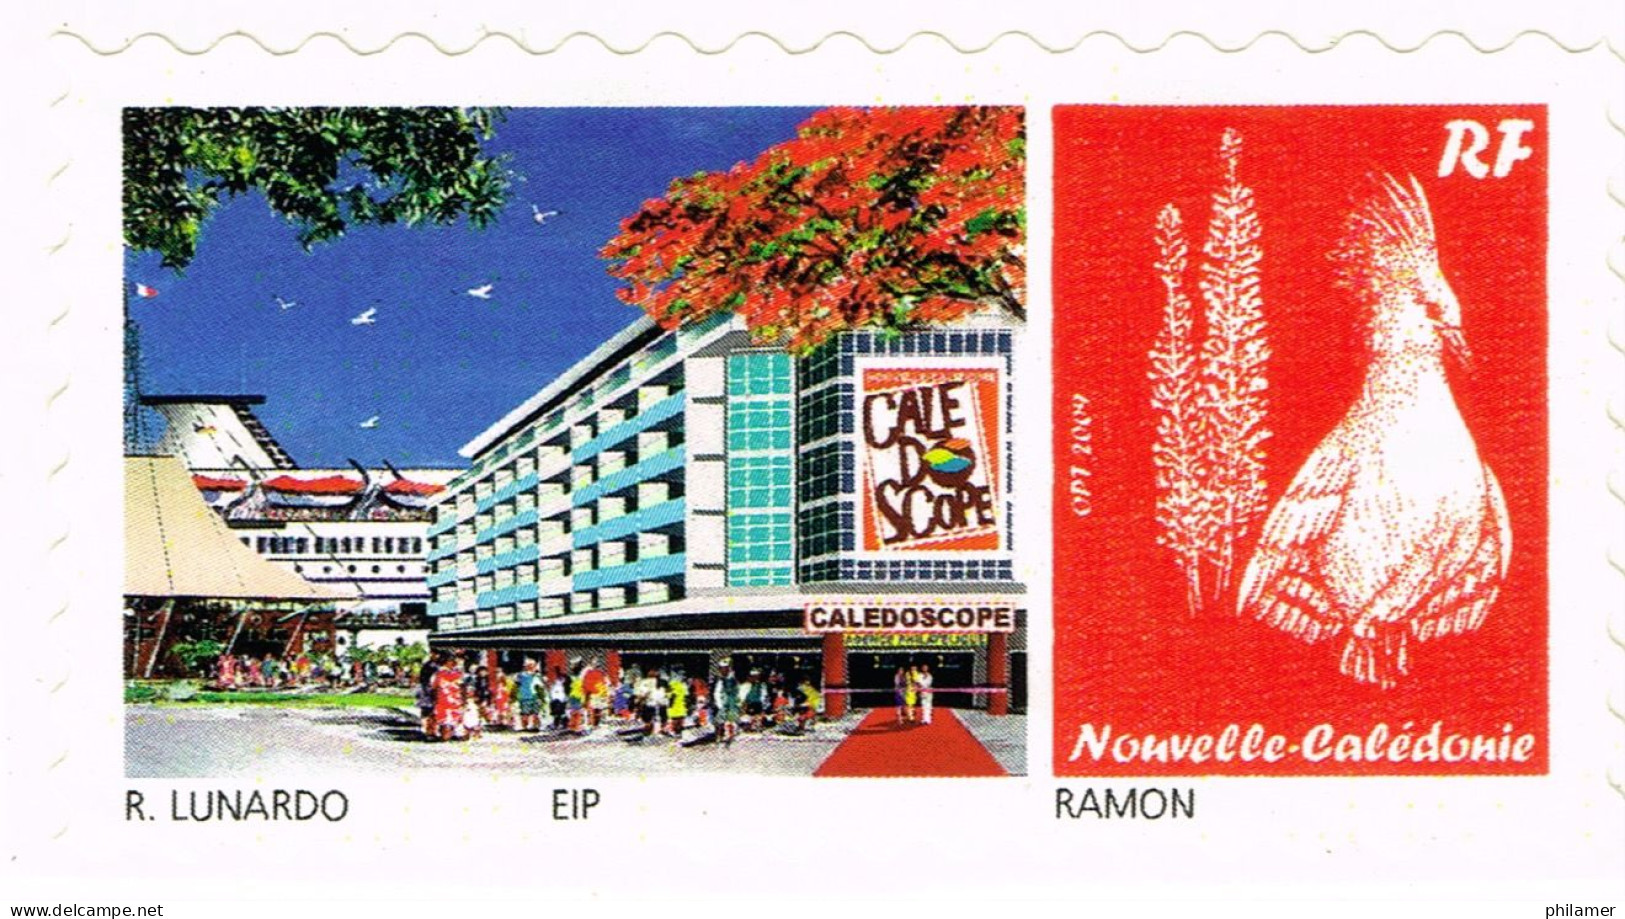 NOUVELLE CALEDONIE NEW CALEDONIA Timbre A Moi Personnalis Public YT 1187 TPNC21 Caledoscope 2012 Ramon Neuf B - Ungebraucht